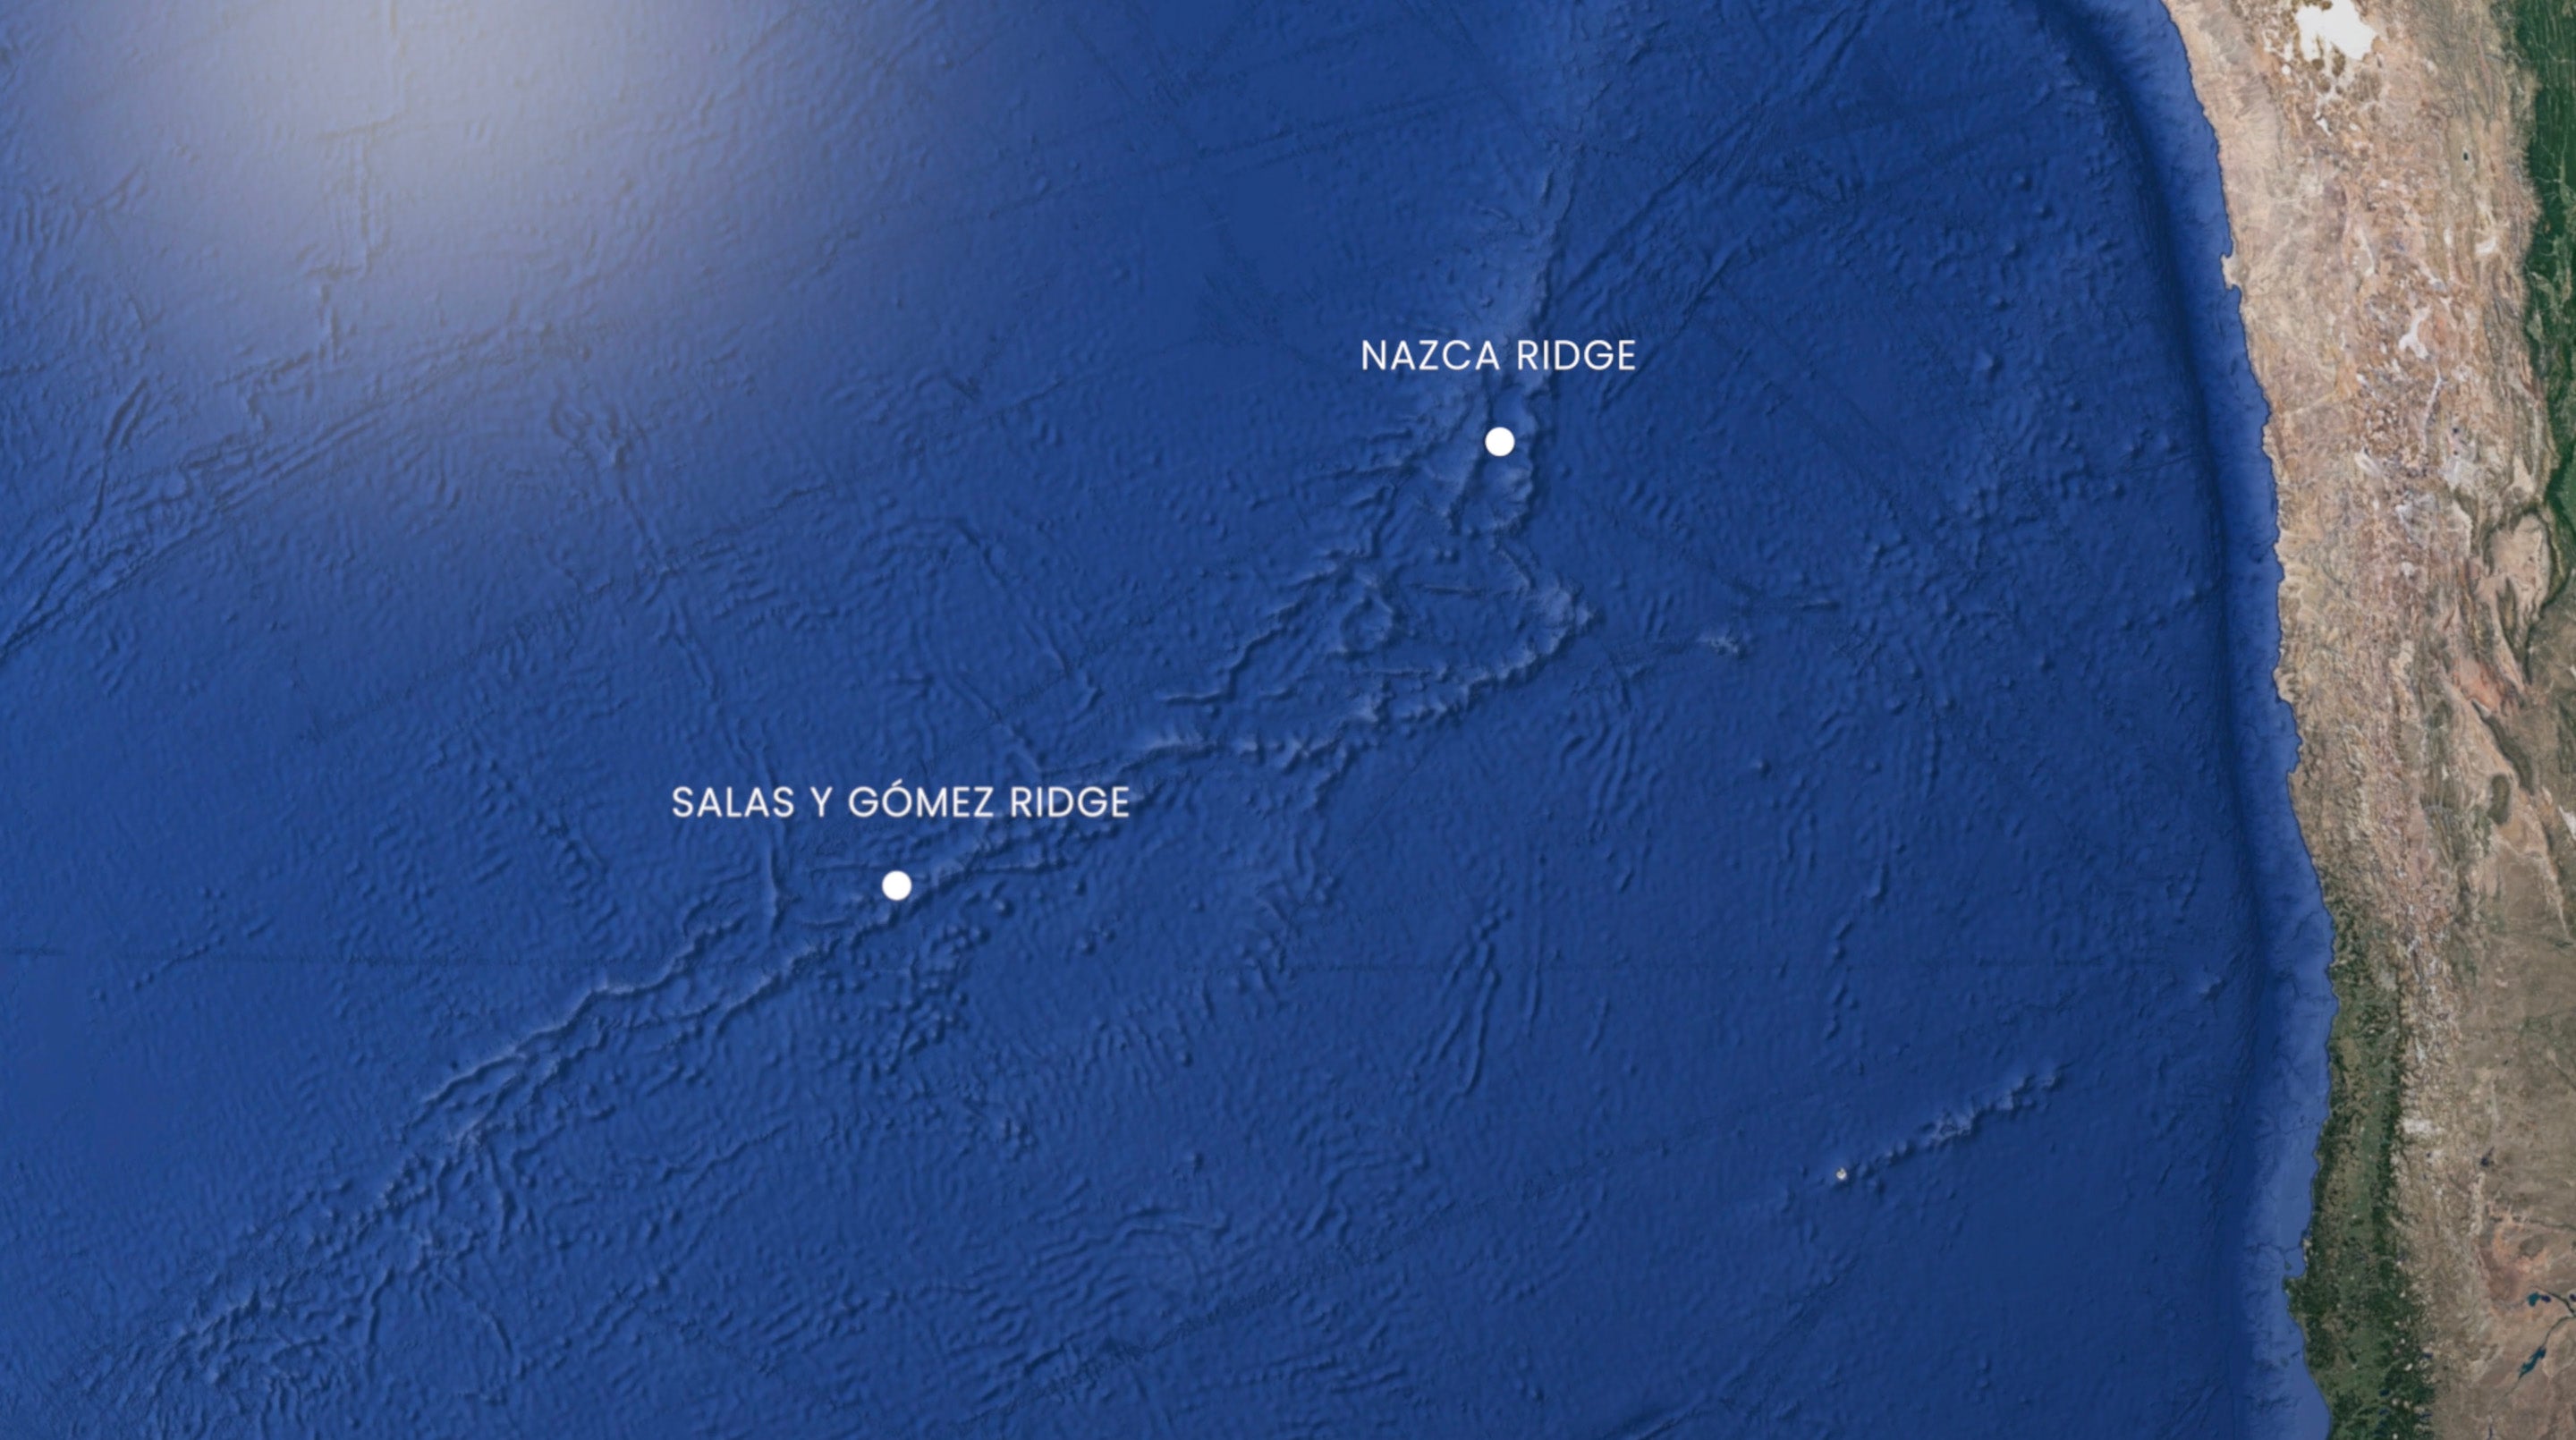 The Salas y Gómez Ridge off the coast of Chile where the species were discovered